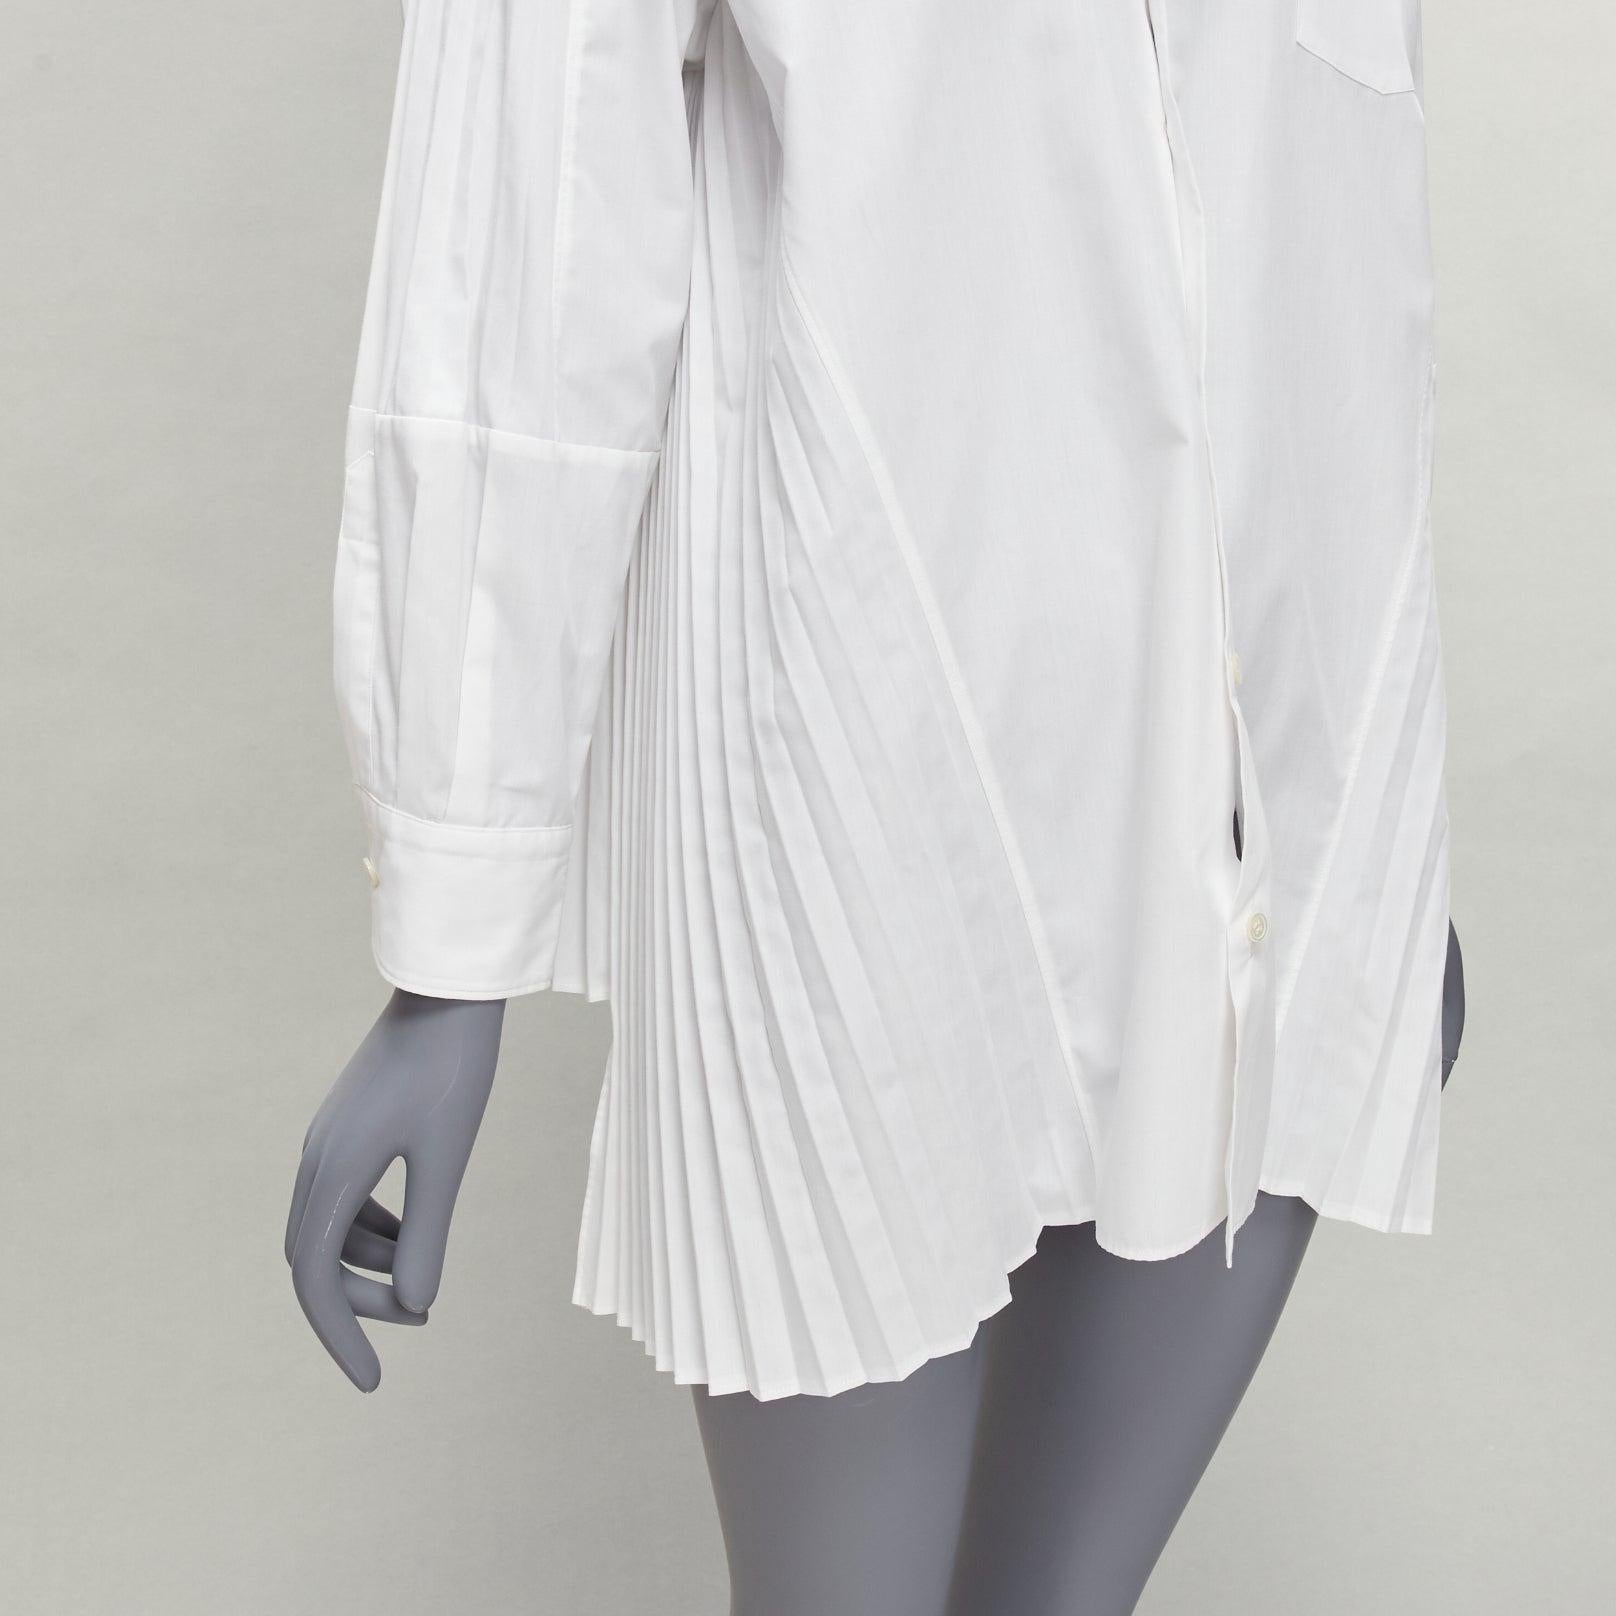 JUNYA WATANABE 2018 white accordion pleat side tunic shirt XS
Reference: LNKO/A02229
Brand: Junya Watanabe
Designer: Junya Watanabe
Collection: 2018
Material: Polyester, Cotton
Color: White
Pattern: Solid
Closure: Button
Extra Details: Accordion